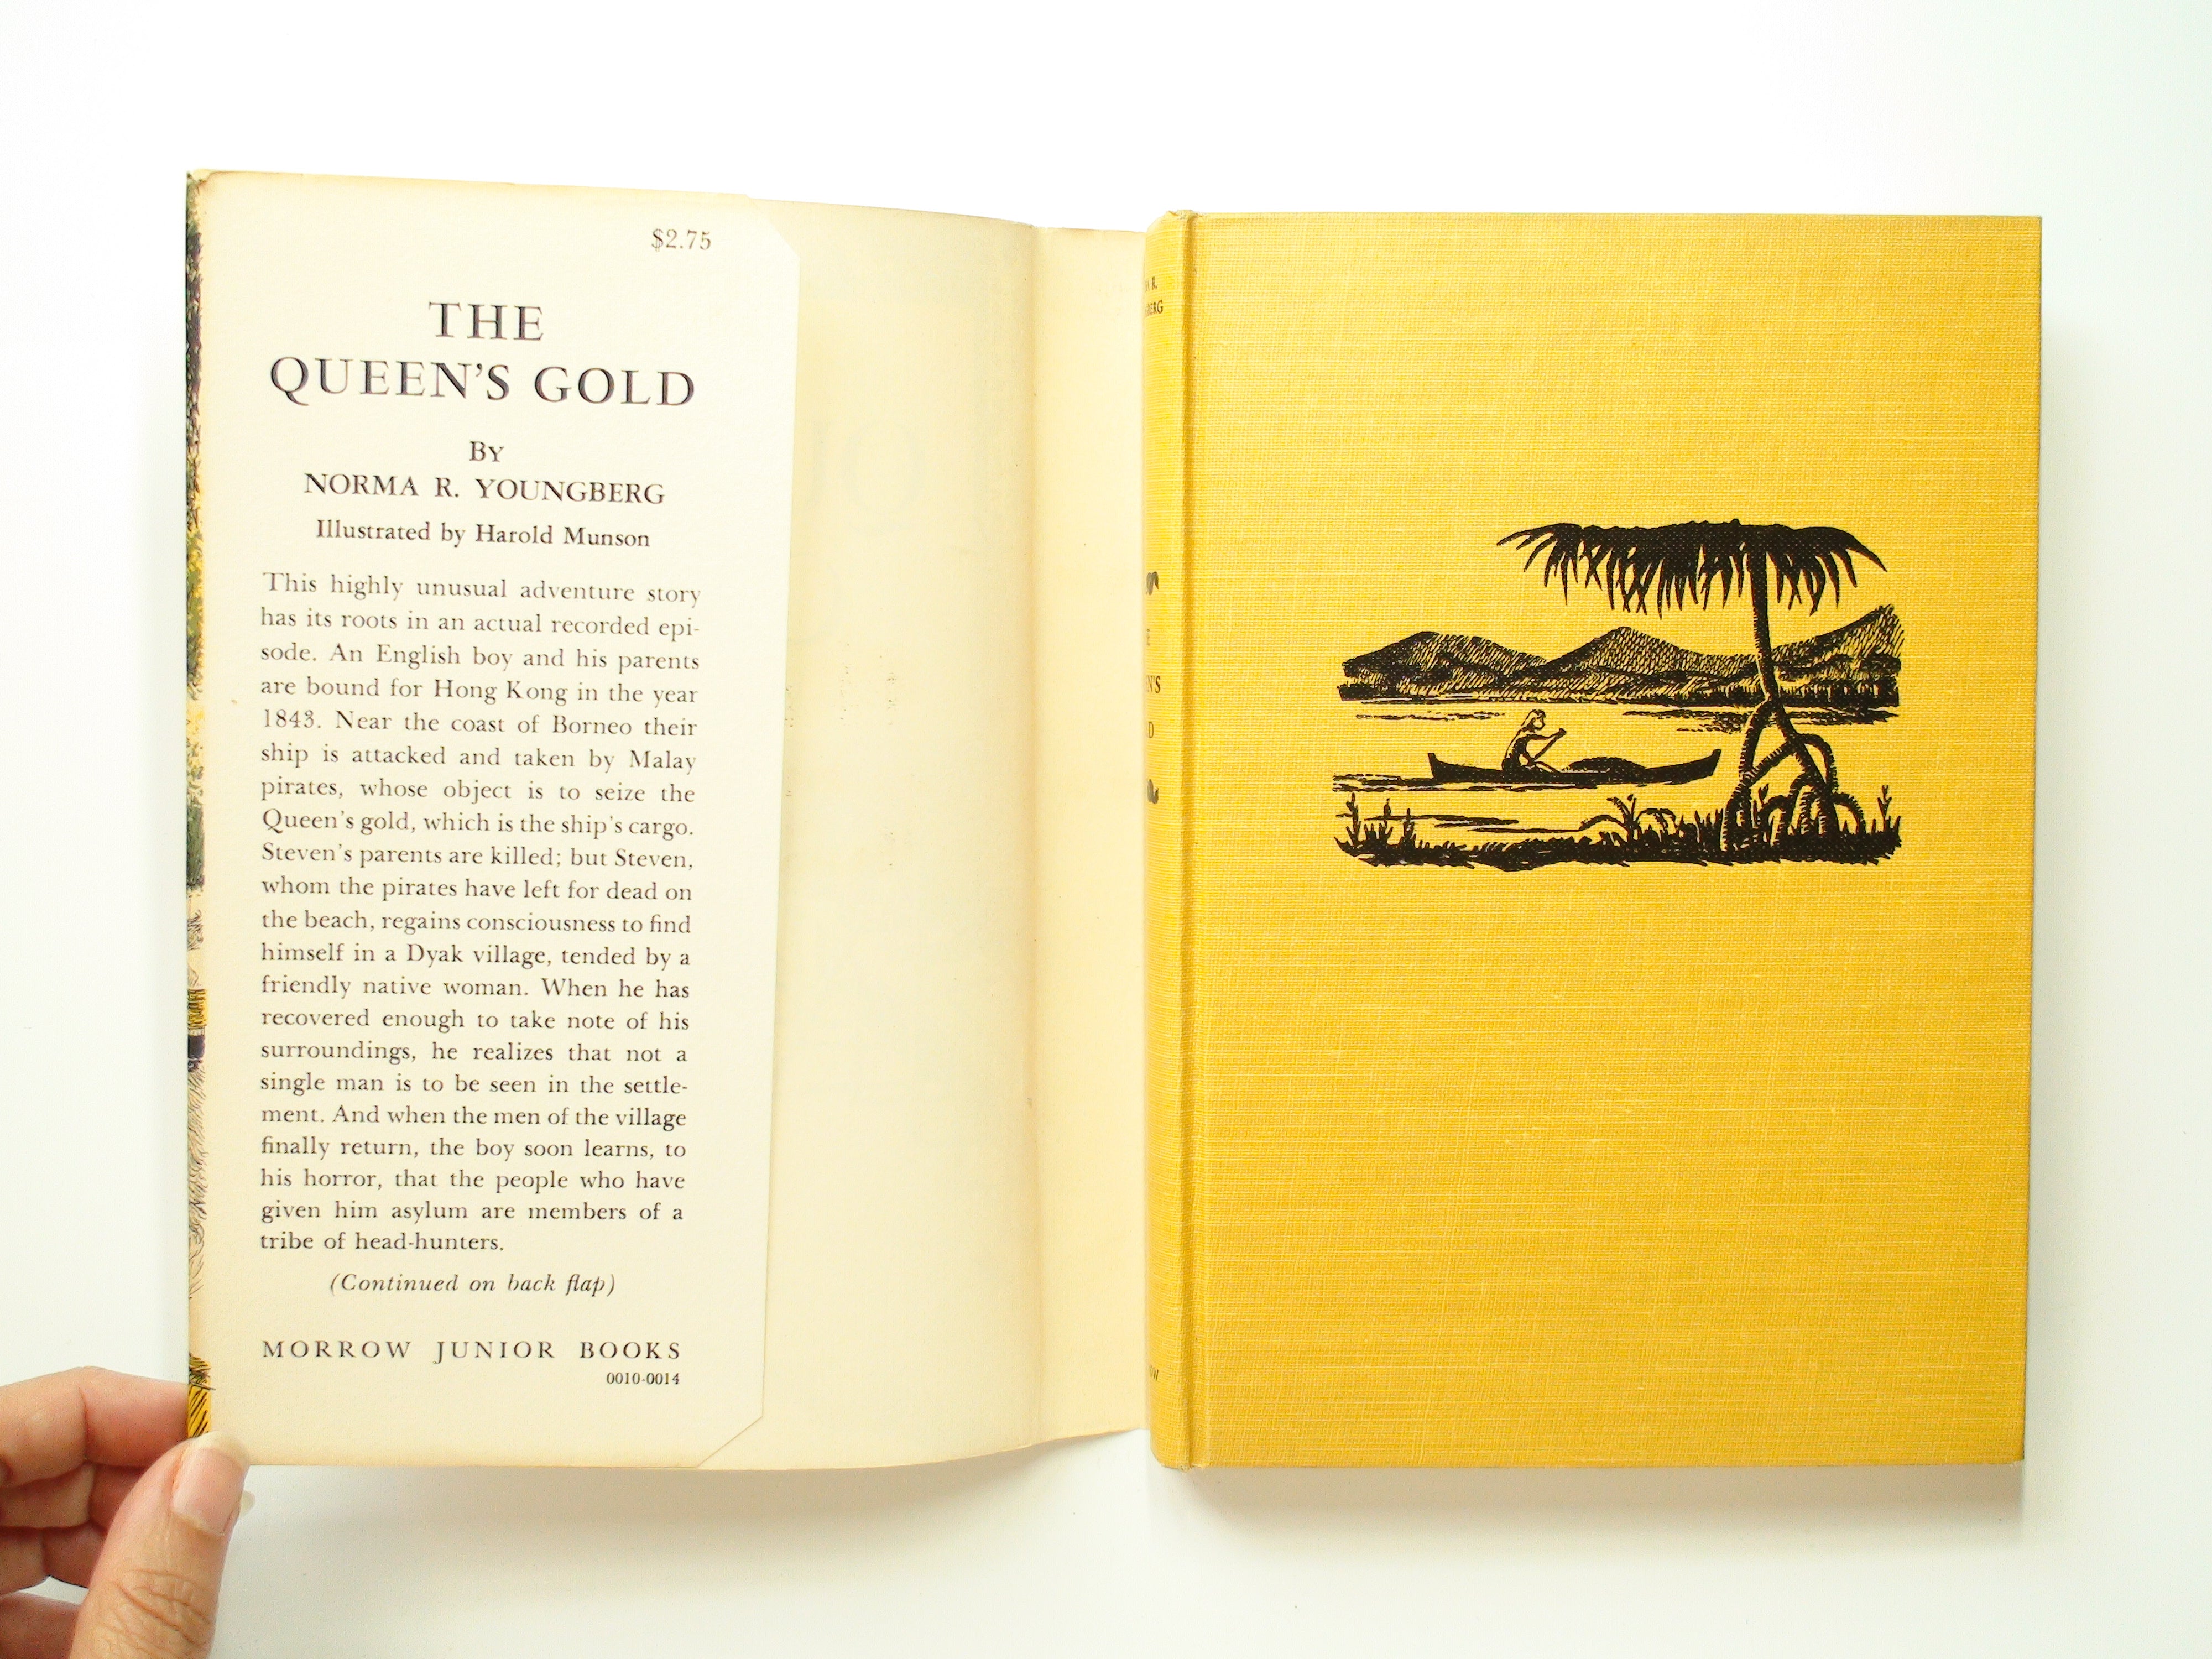 The Queen's Gold by Norma R. Youngberg, Hardcover w/ D/J, 1st Ed, 1956